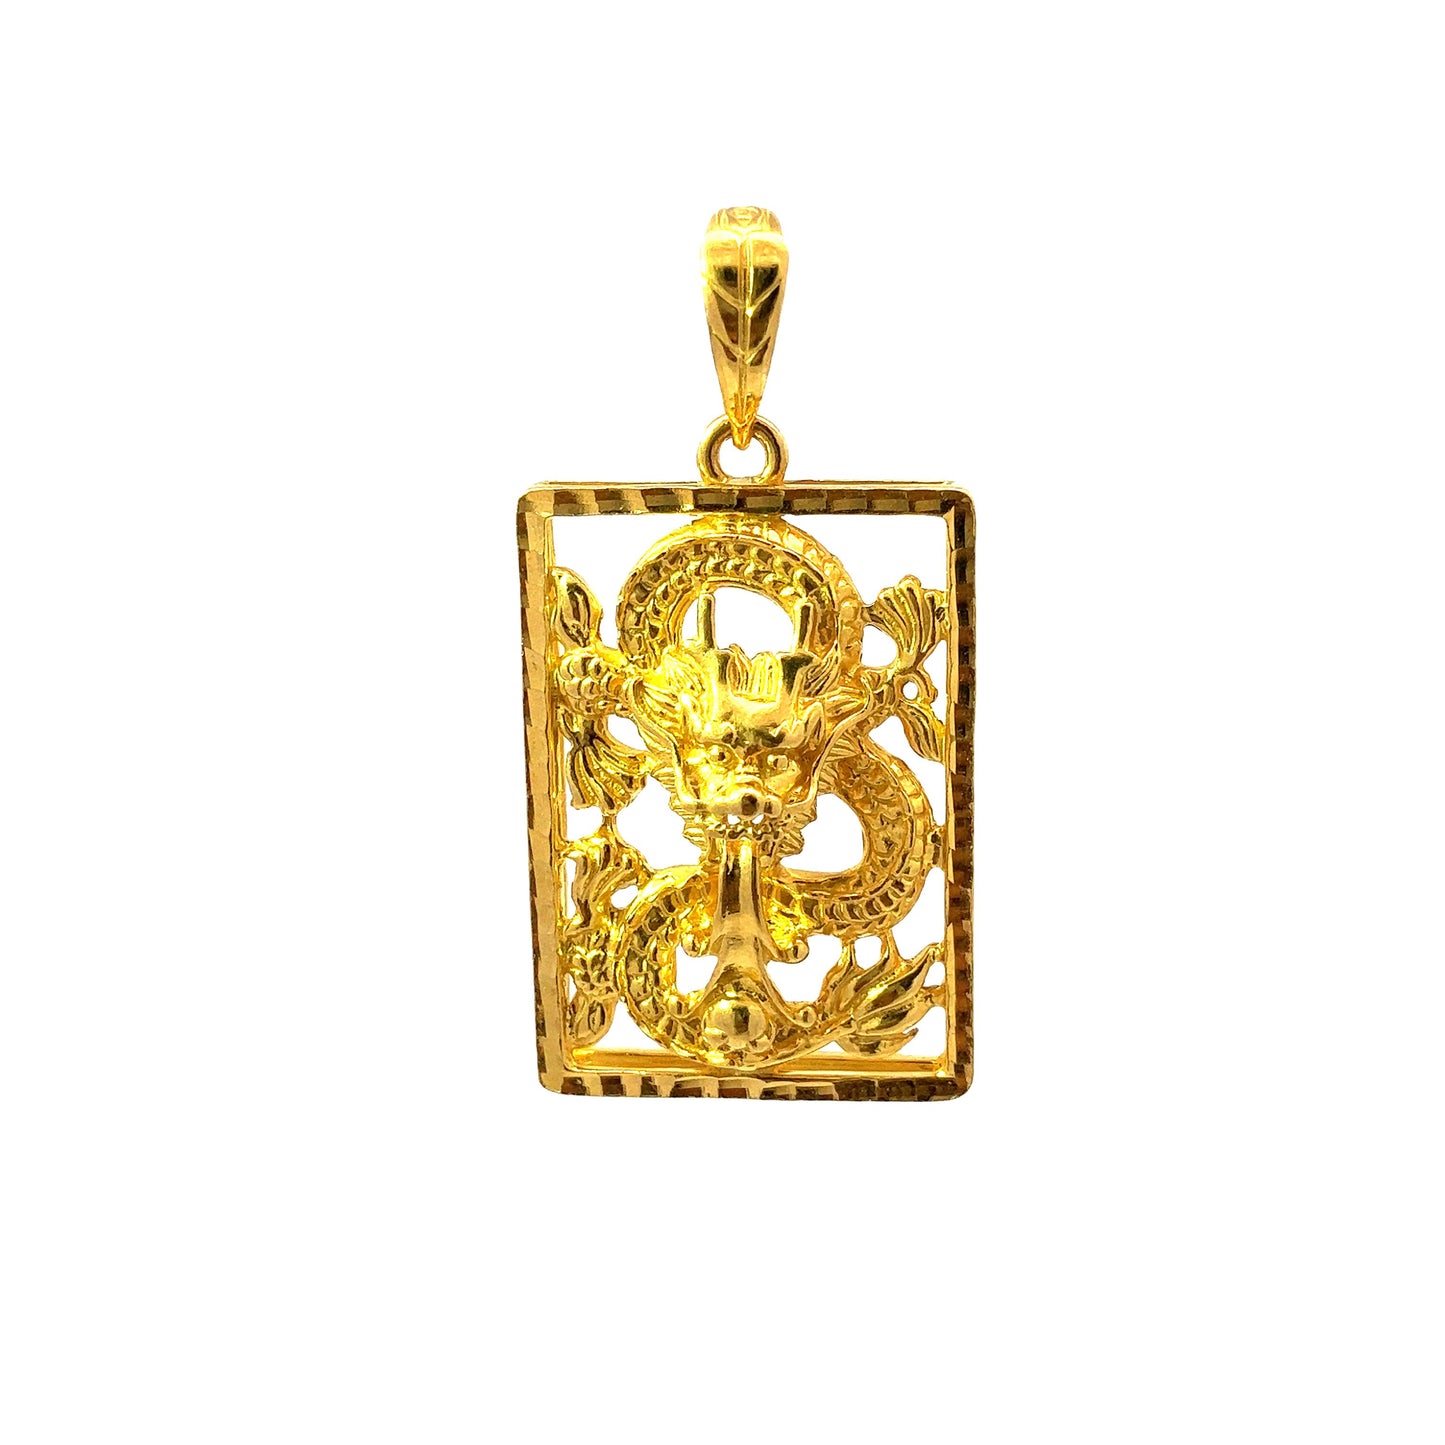 GOLD PENDANT ( 22K ) ( 7.76g ) - 0014822 Chain sold separately